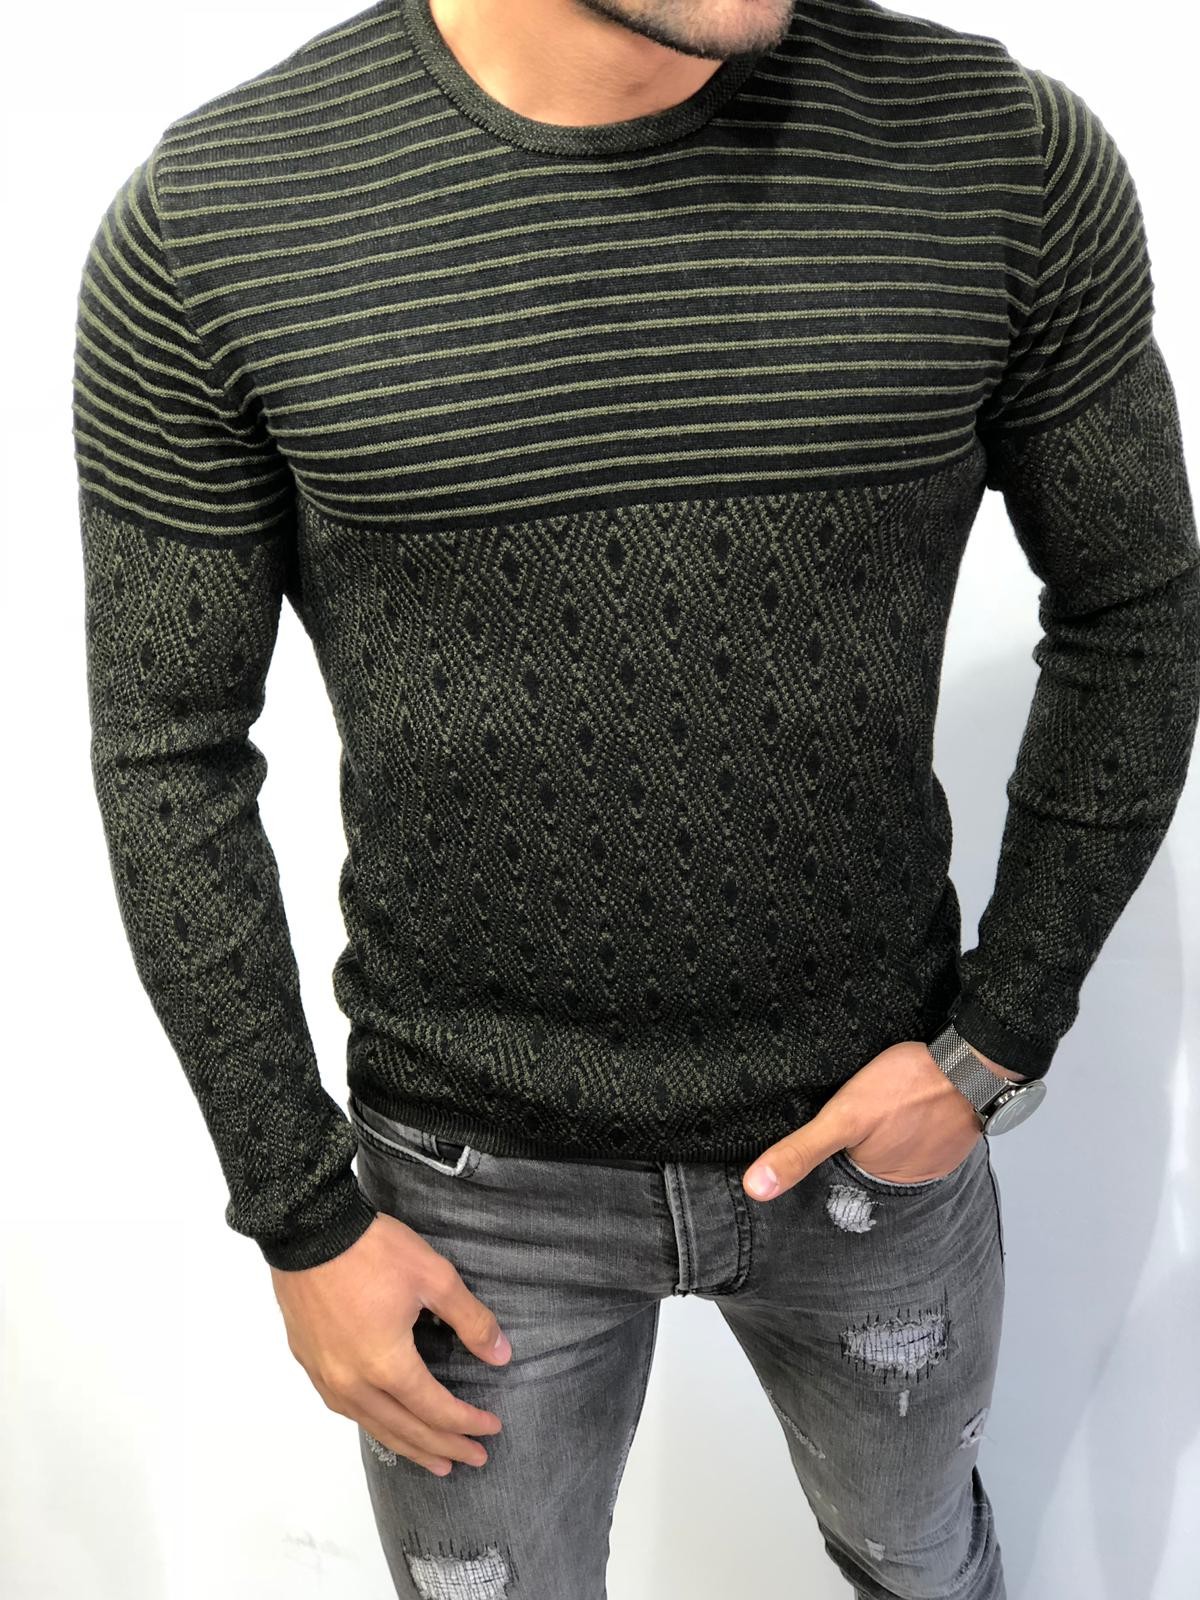 Buy Khaki Slim Fit Patterned Sweater by Gentwith.com with Free Shipping